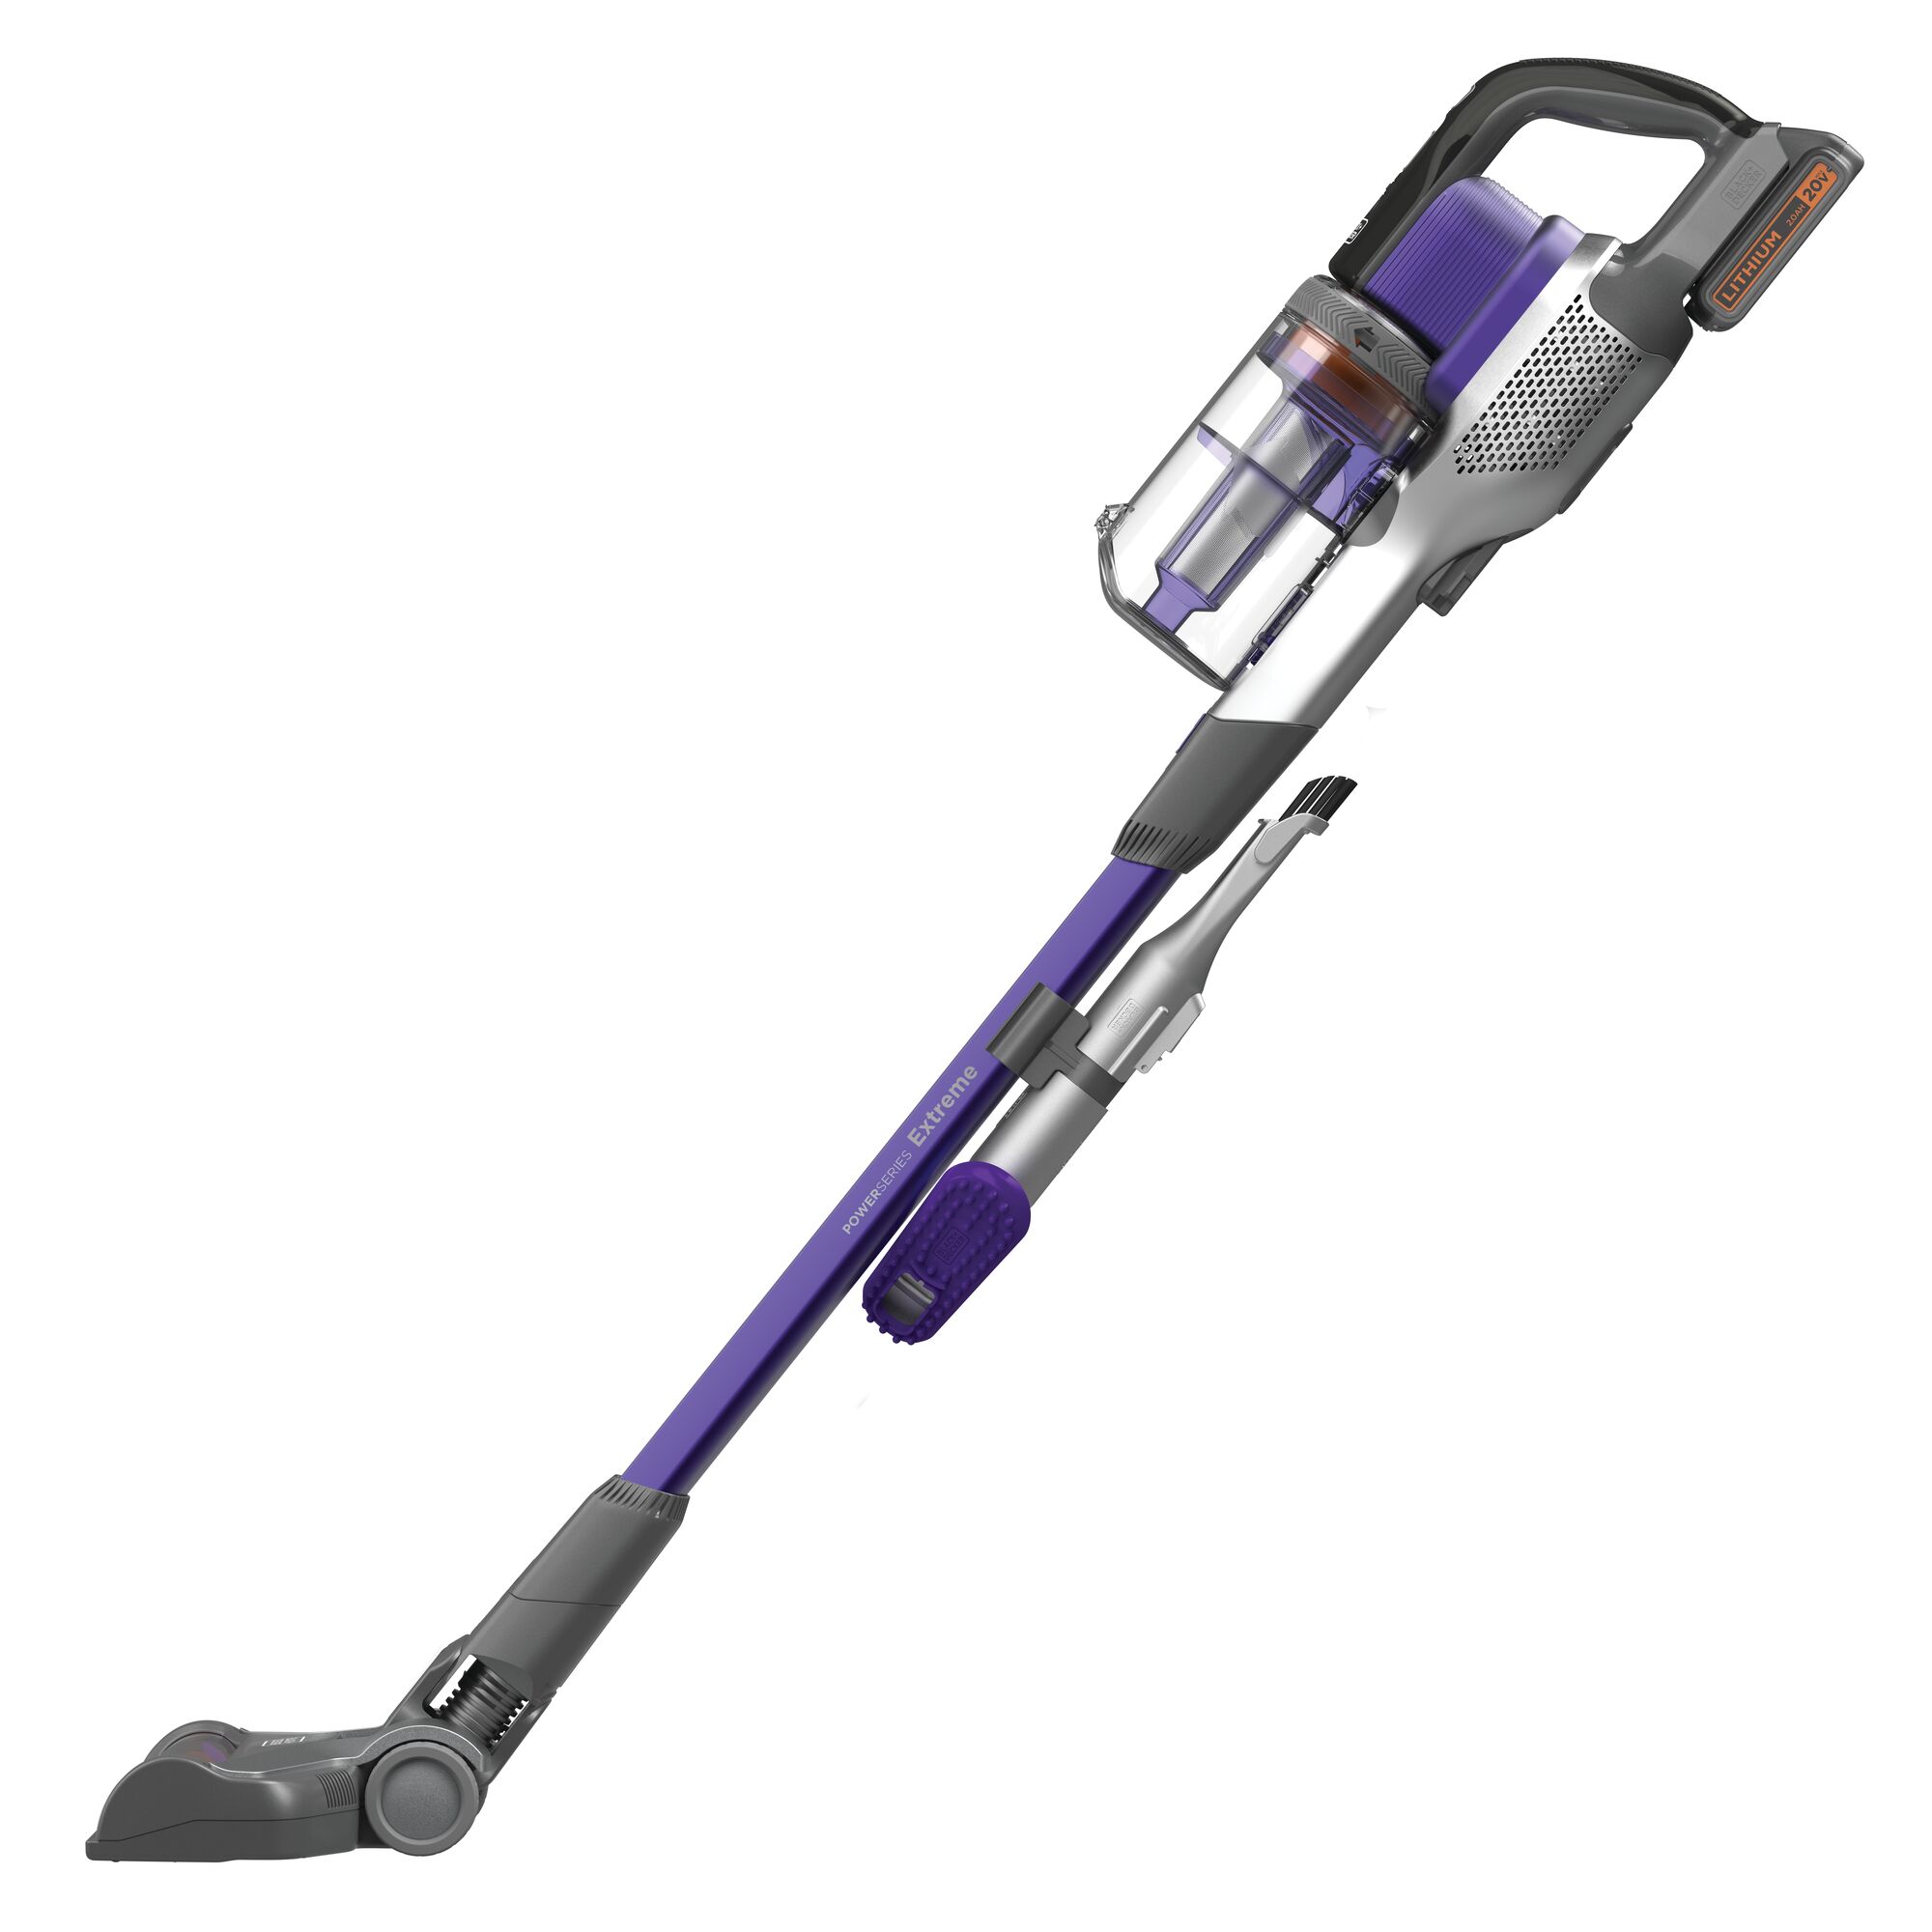 Profile of POWERSERIES Extreme Pet Cordless Stick Vacuum Cleaner.